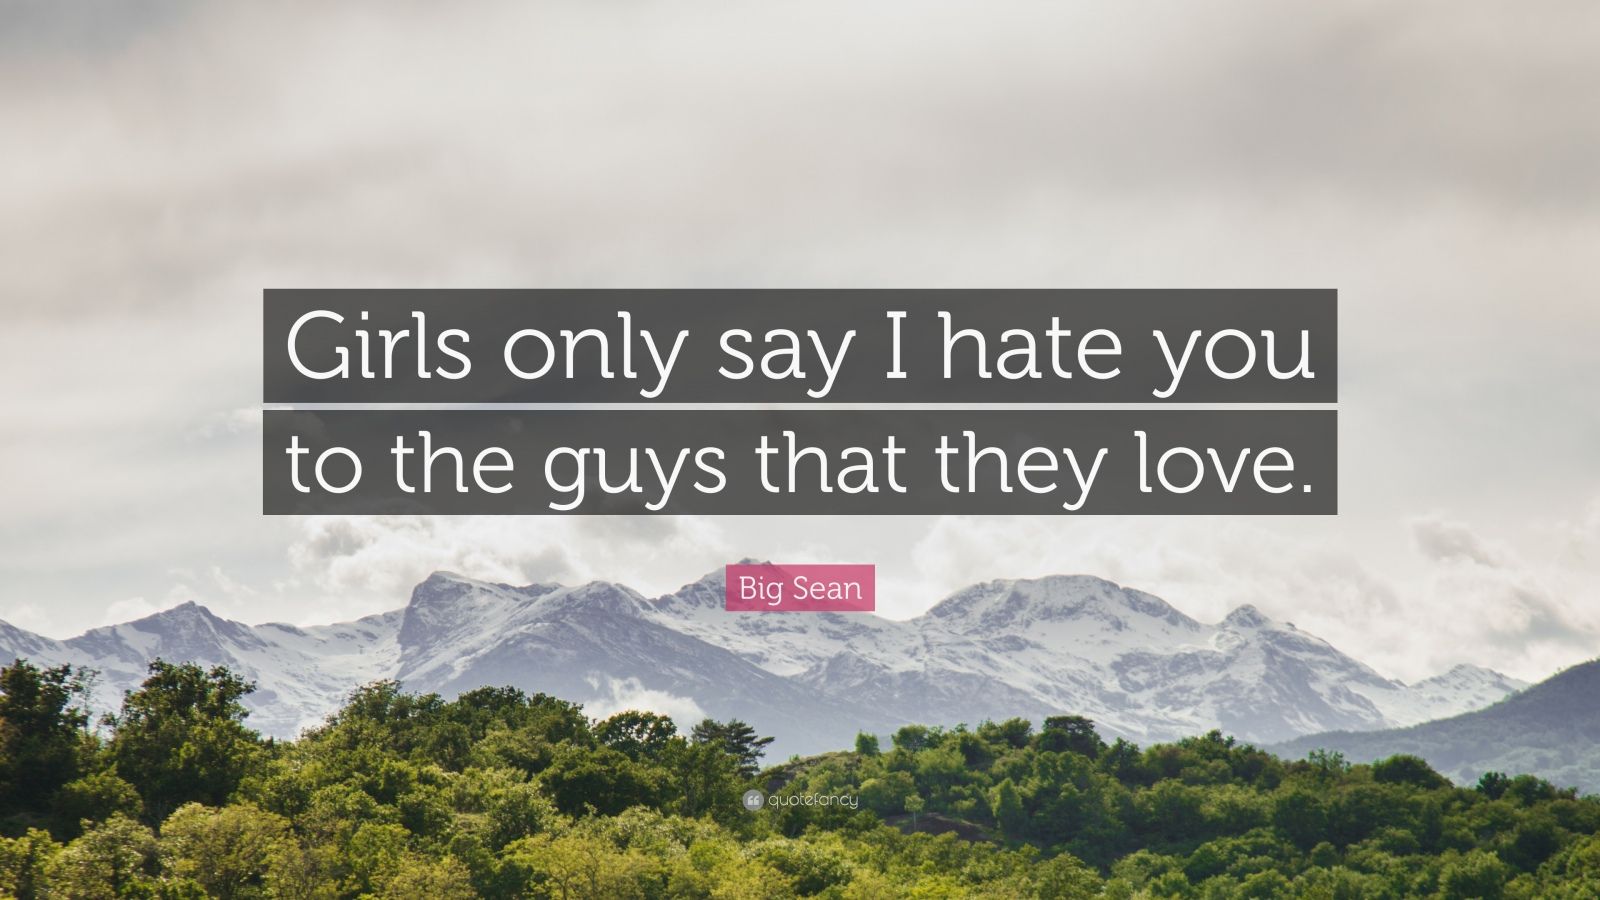 Big Sean Quote: “Girls only say I hate you to the guys that they ...